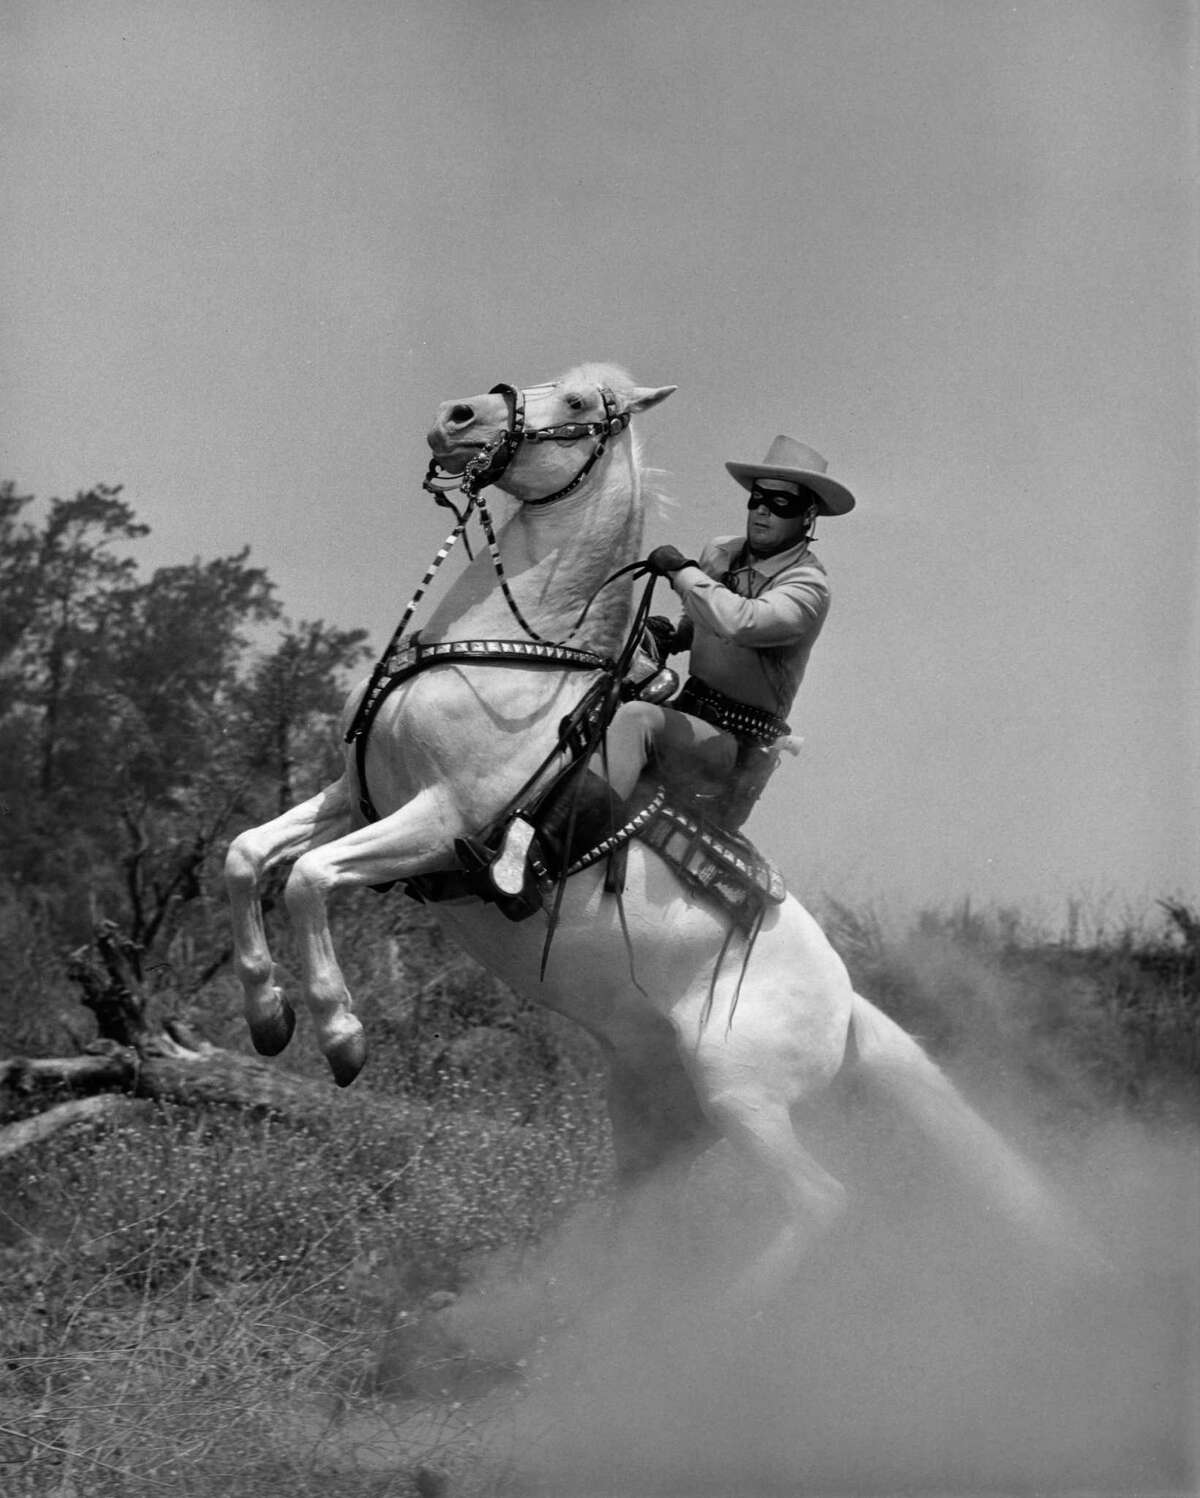 circa 1955: American actor Clayton Moore, in masked costume as 'The Lone Ranger,' rears back on his horse, Silver, in a still from the American television series, 'The Lone Ranger'.